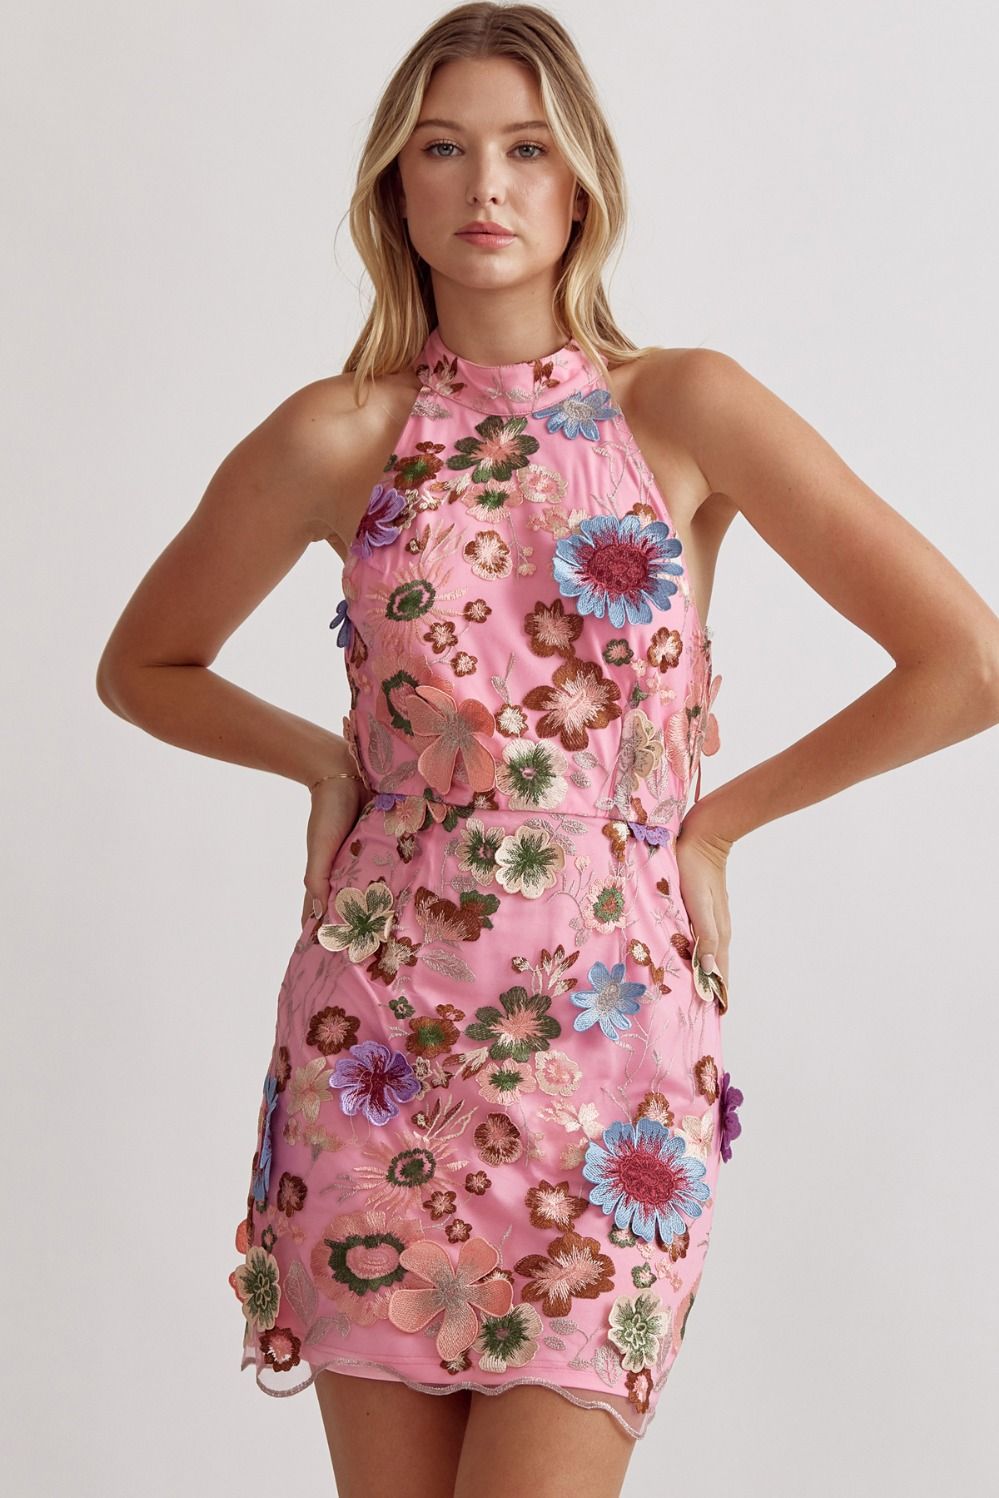 ENTRO INC Women's Dresses Floral Embroidered Mini Dress || David's Clothing